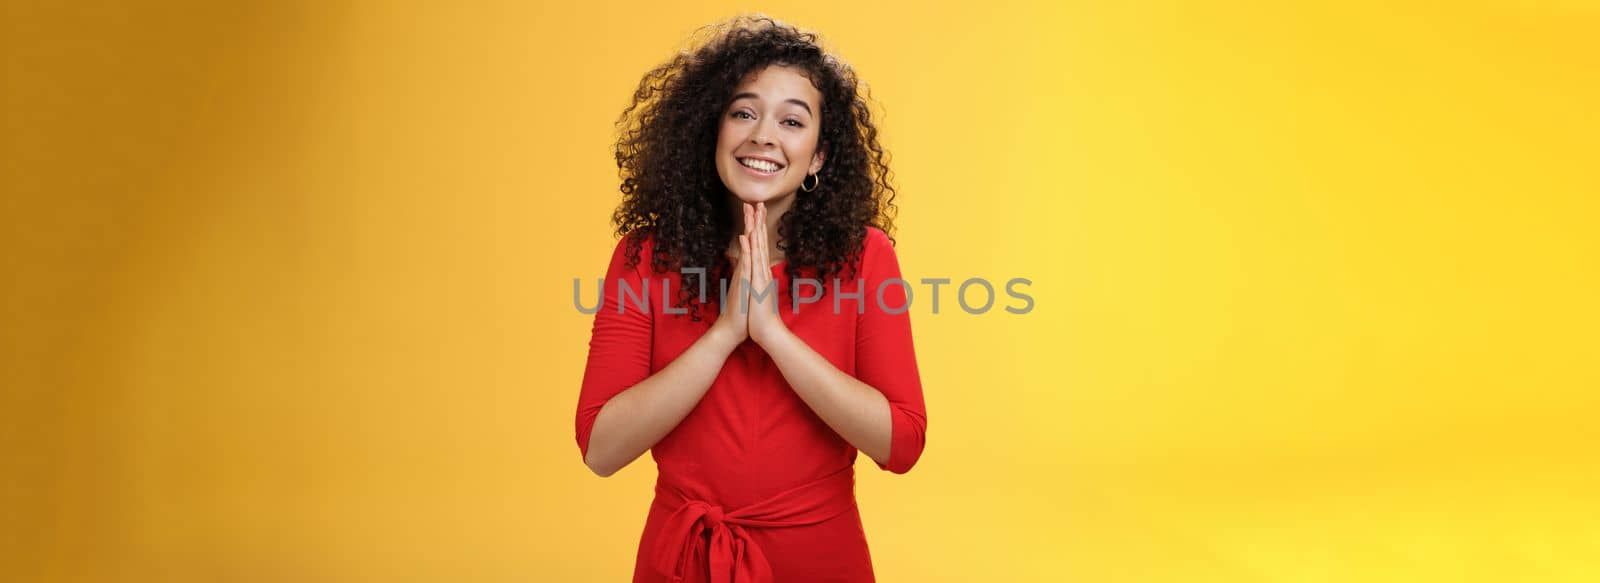 Girl with angel smile making eyes as wanting friend make favour, holding hands in pray, grinning and gazing with anticipation as begging for help standing silly and cute against yellow background.